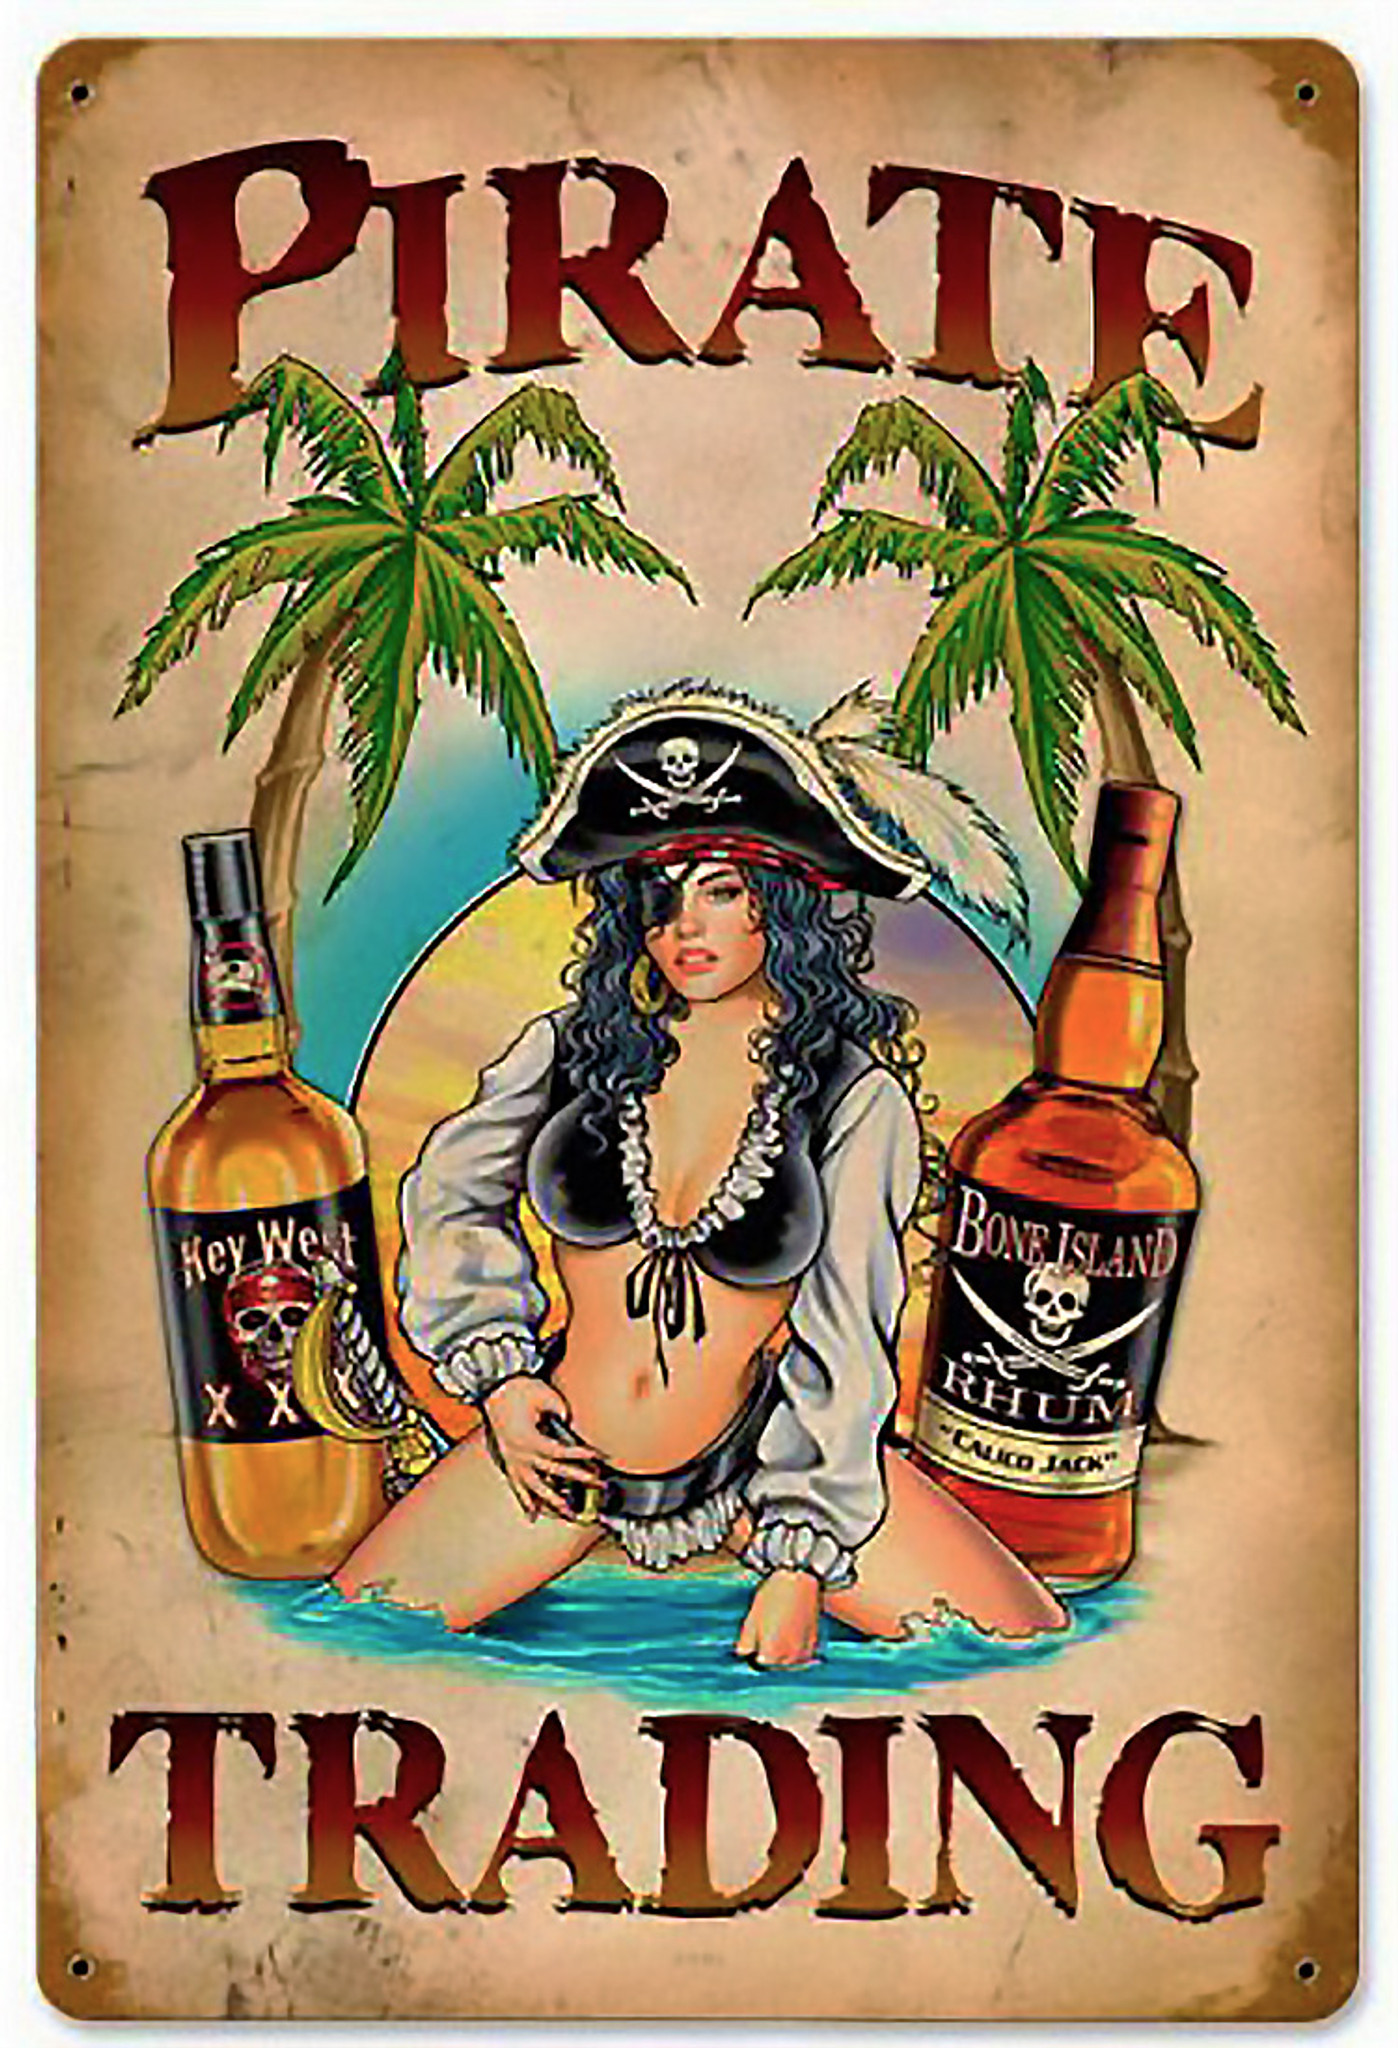 Pirate Trading Pinup Metal Sign 12 x 18 Inches